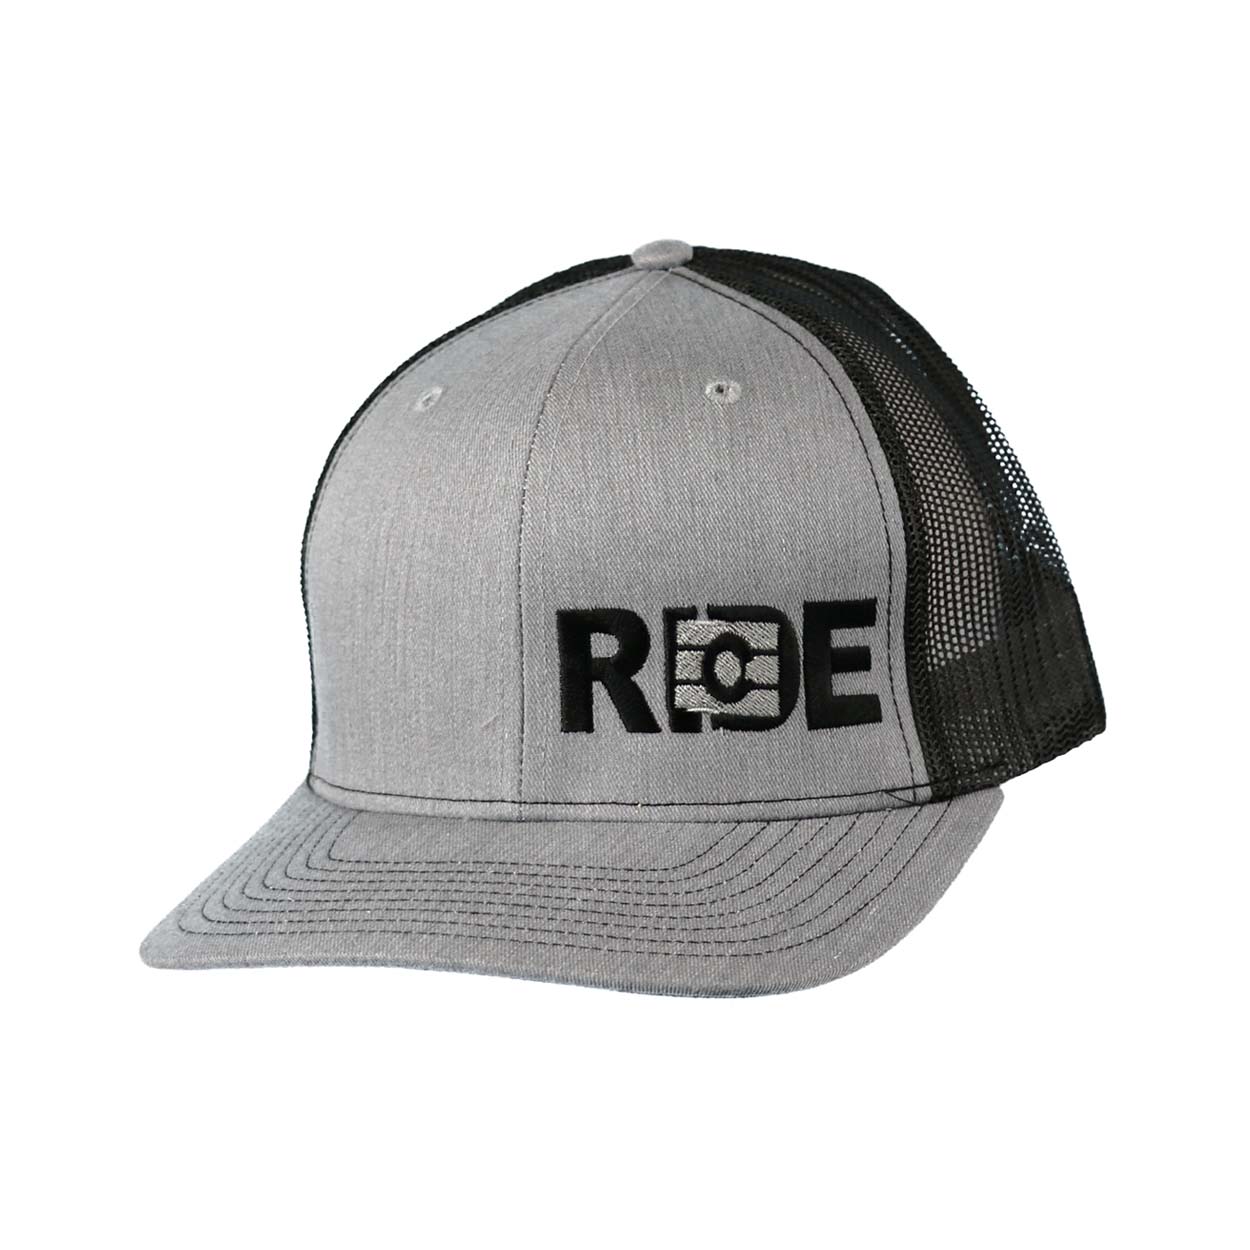 Ride Colorado Night Out Embroidered Snapback Trucker Hat Heather Gray/Black